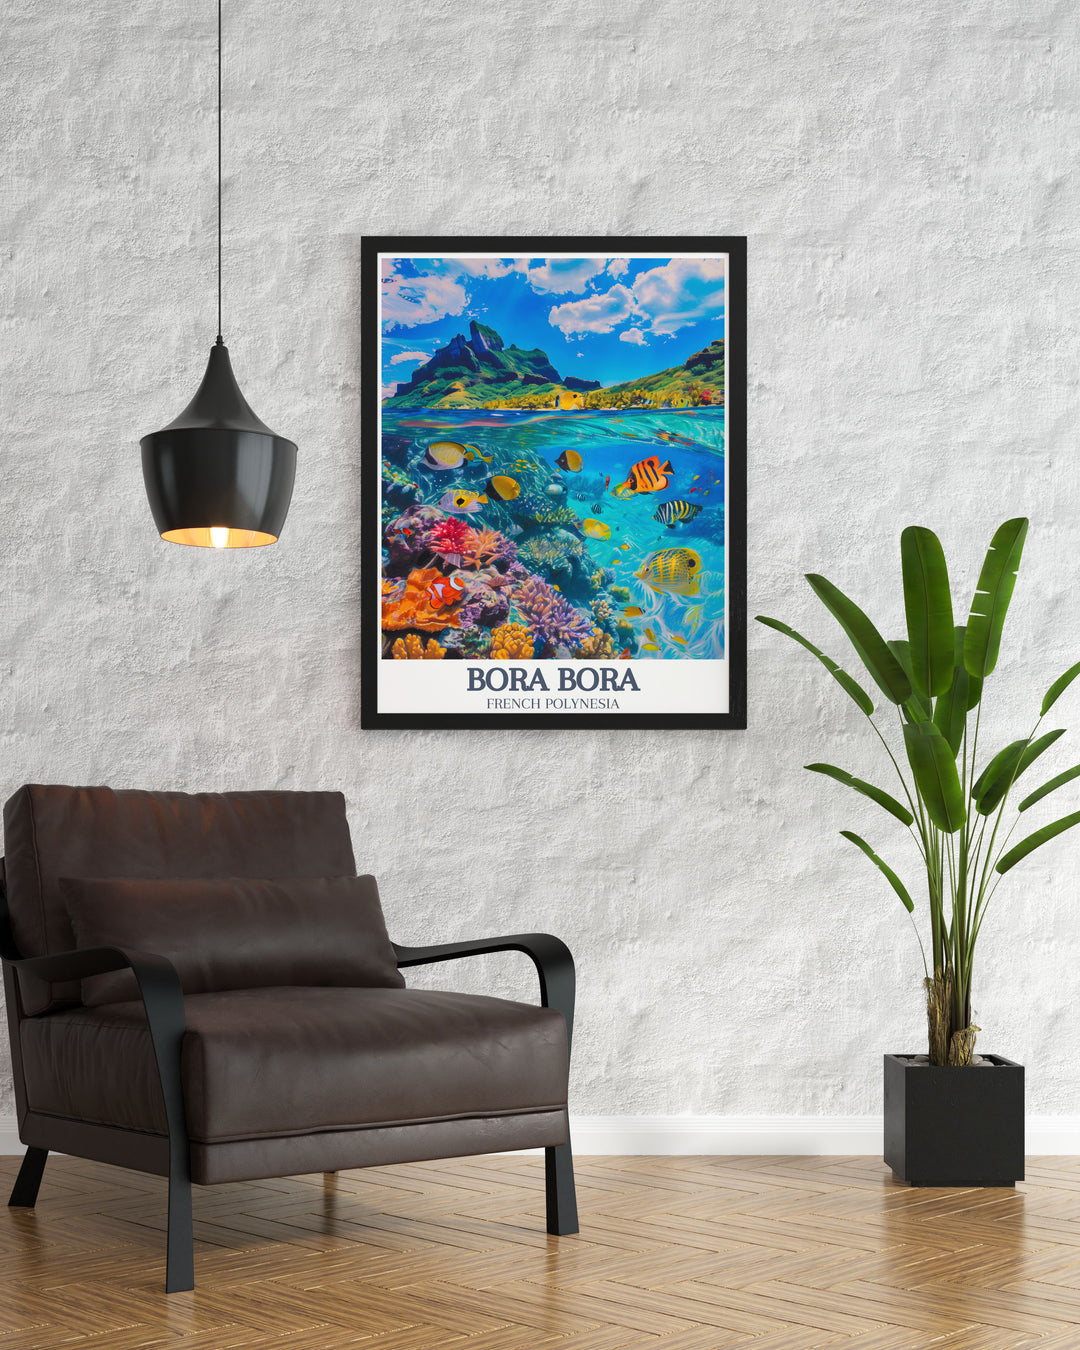 Bora Bora Lagoon Coral Gardens vintage print featuring the lush and colorful underwater world of Bora Bora ideal for wall art and home decor this retro travel poster brings the essence of French Polynesia into your space offering a touch of serenity and natural beauty.